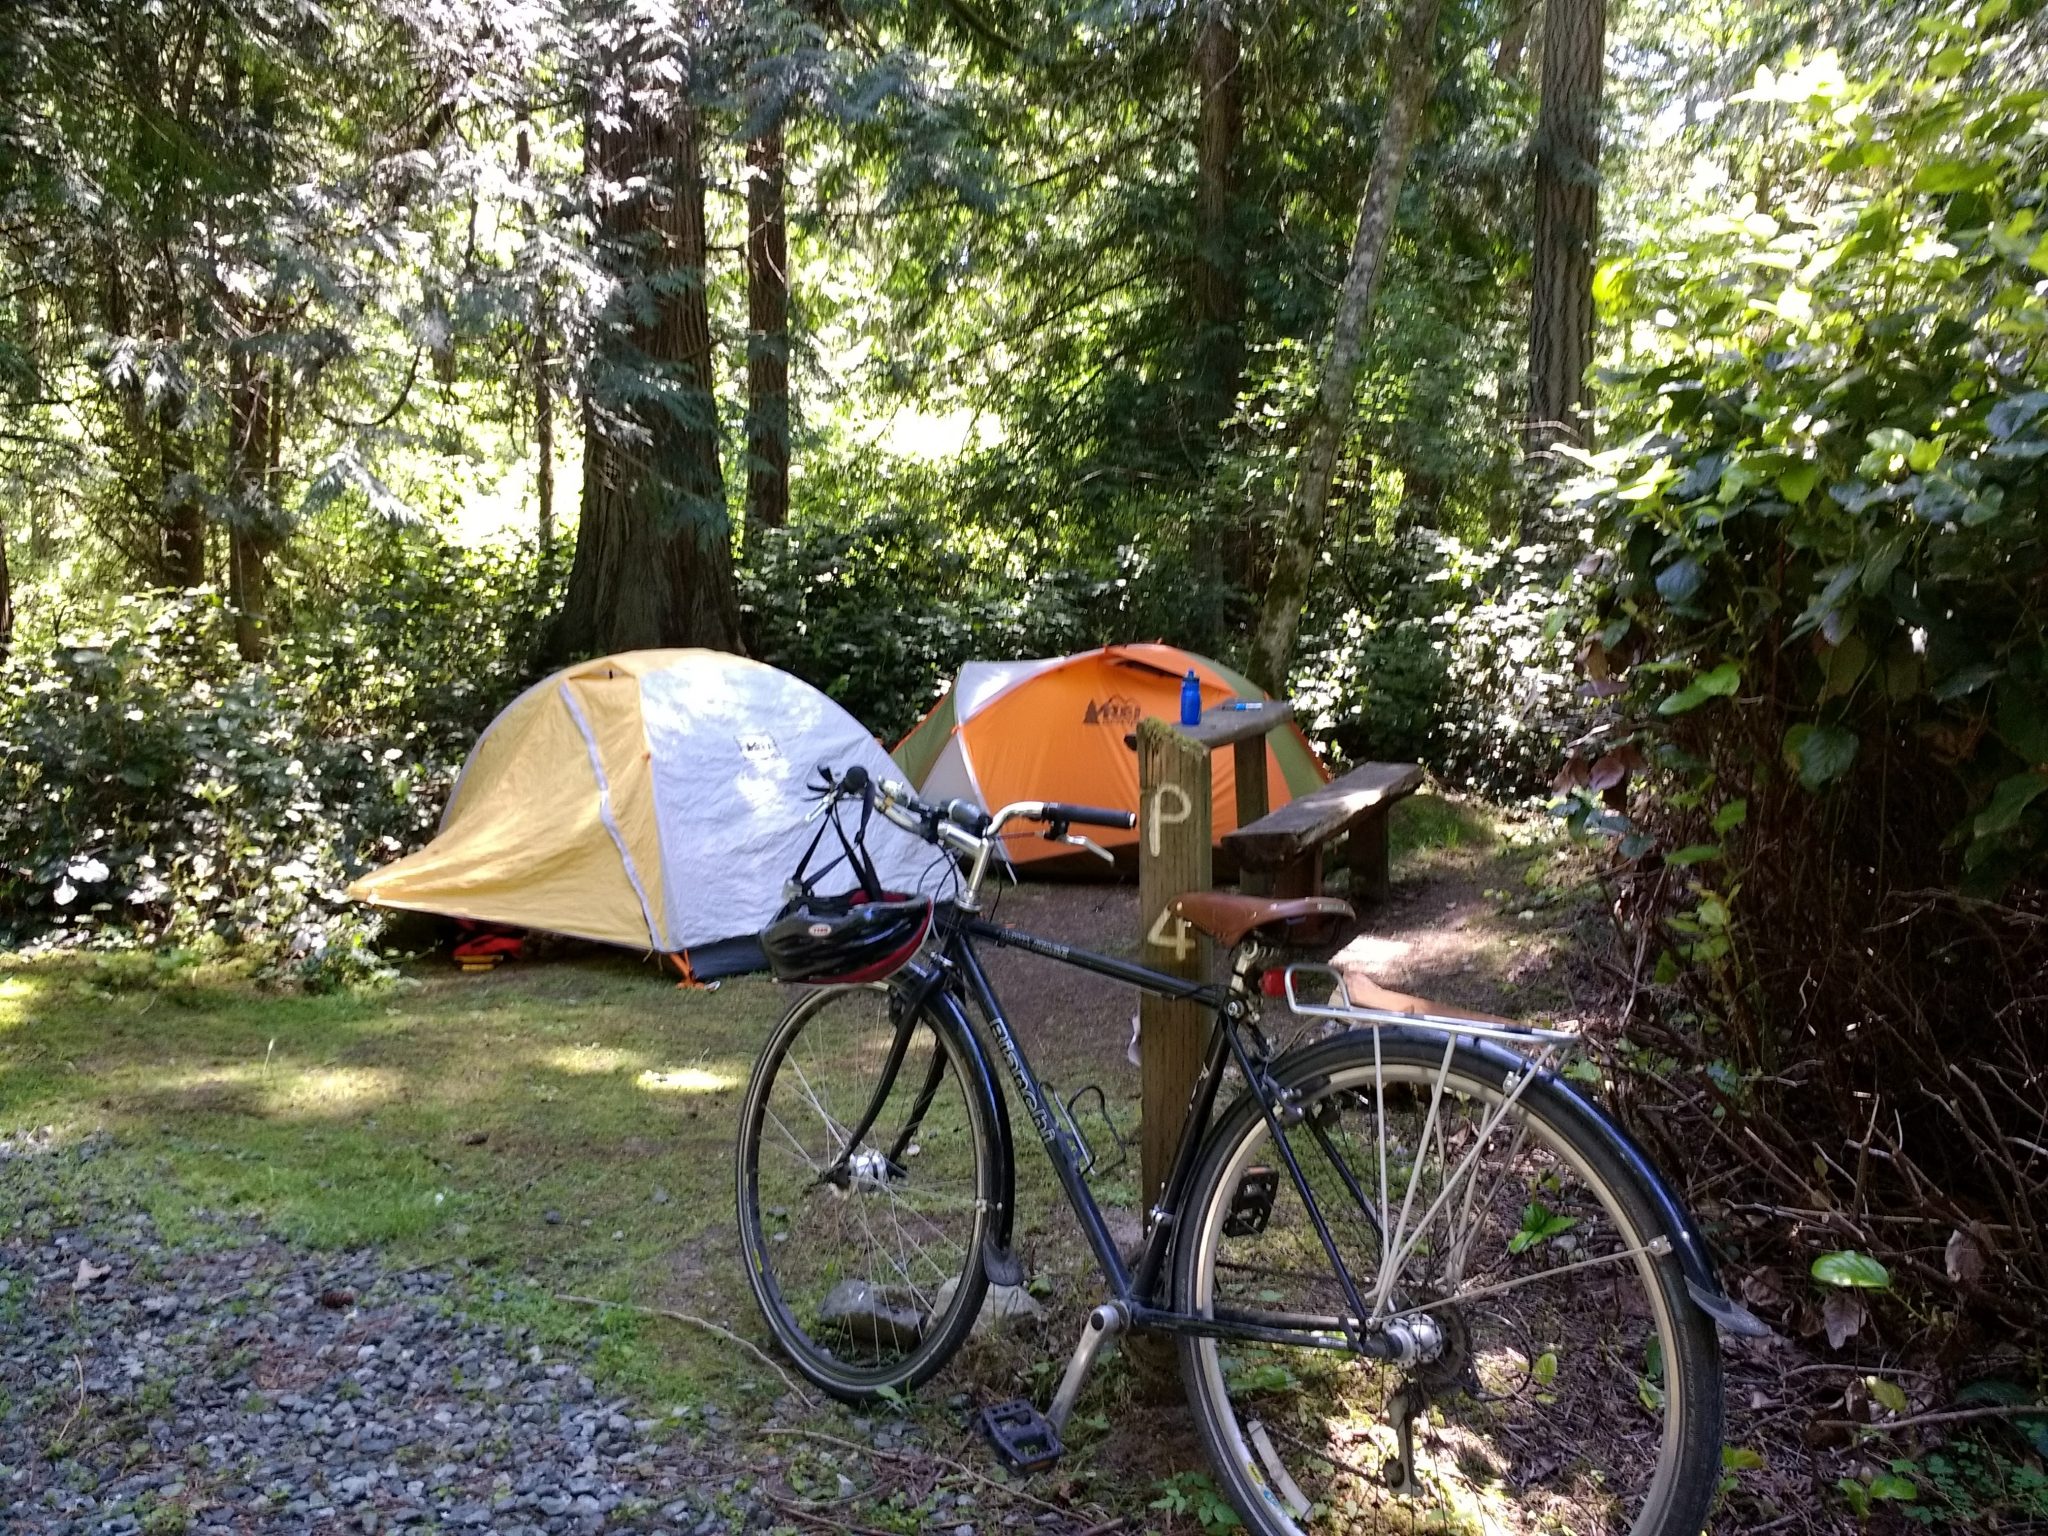 Lopez Island bike camping at Spencer Spit State park. It's a small campsite in the forest with two orange and white tents, a small bench and a bike leaning against a wooden post.